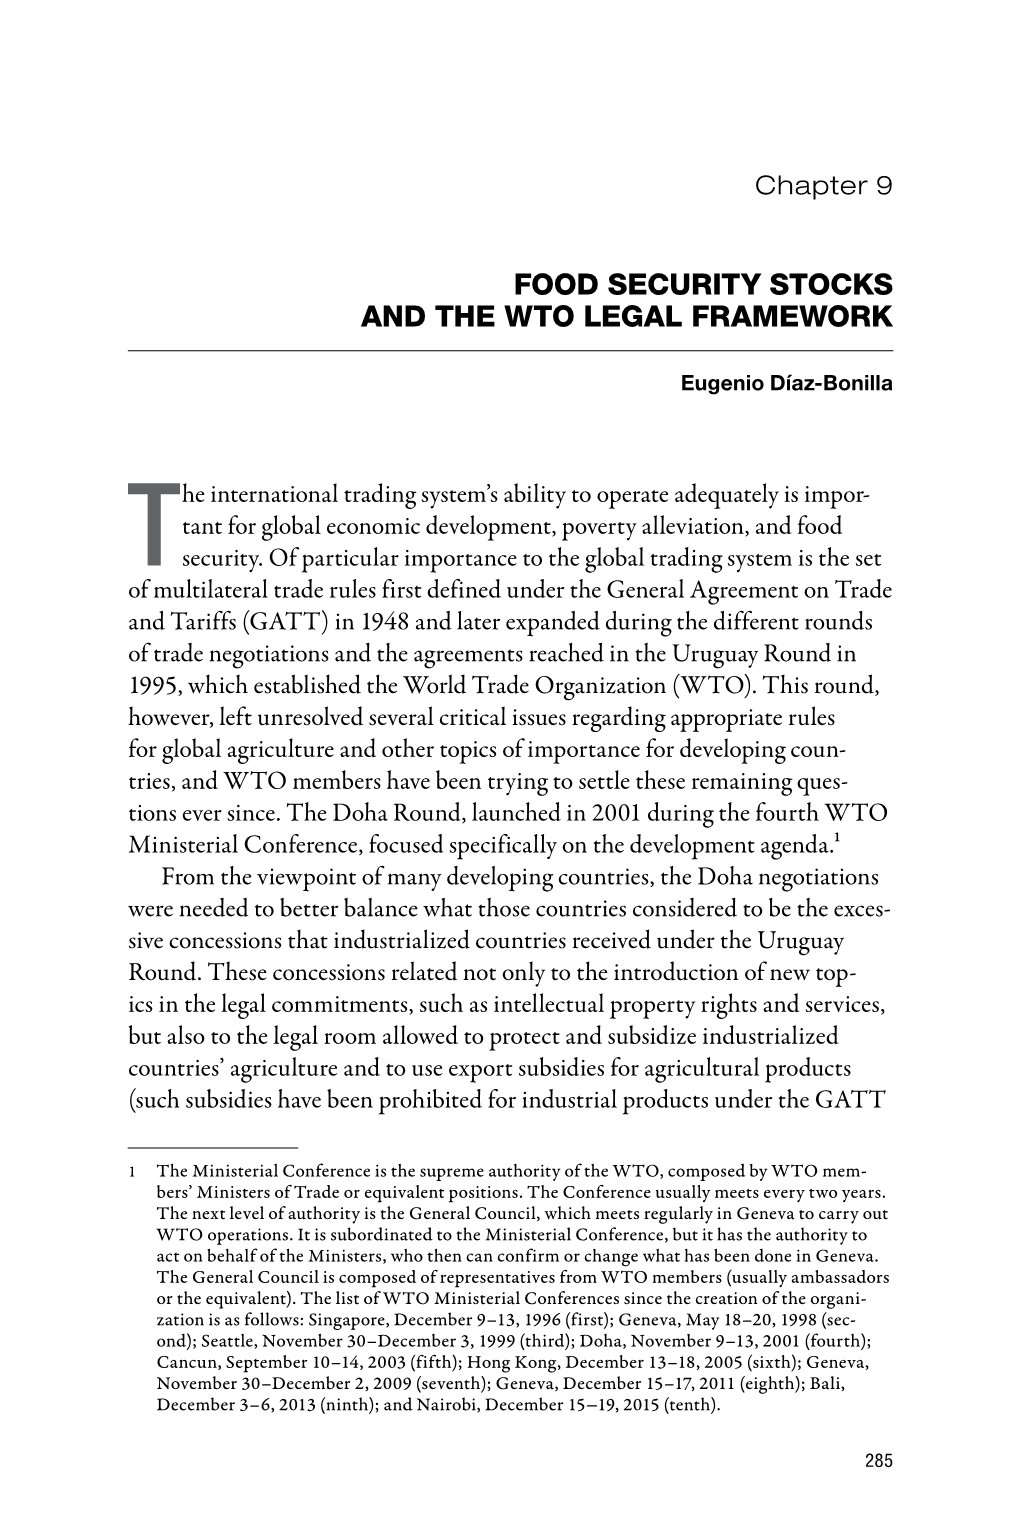 Food Security Stocks and the Wto Legal Framework